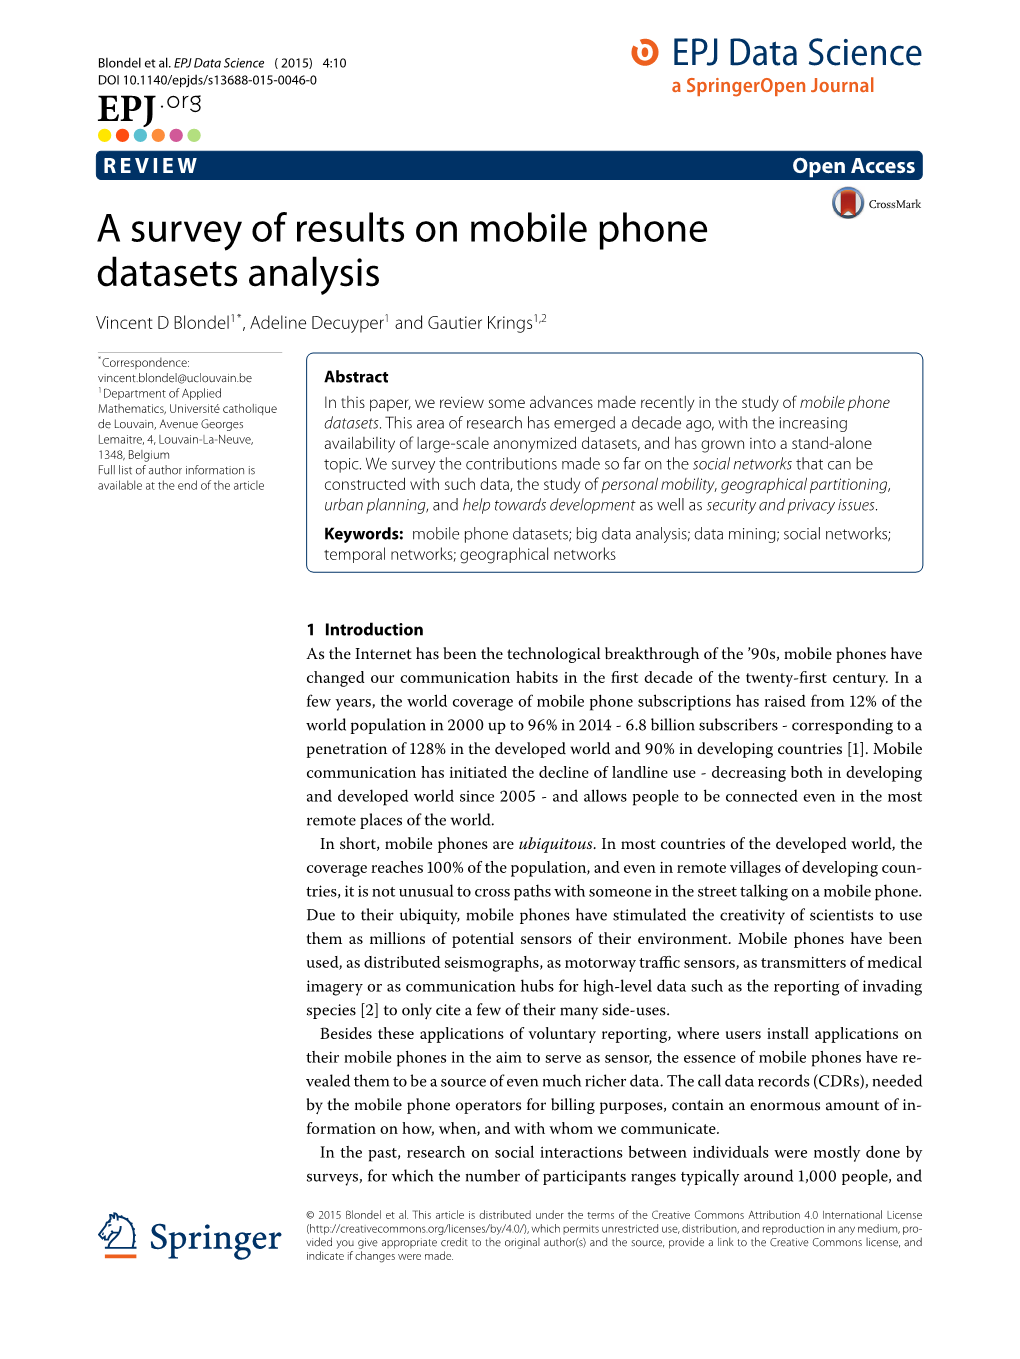 A Survey of Results on Mobile Phone Datasets Analysis